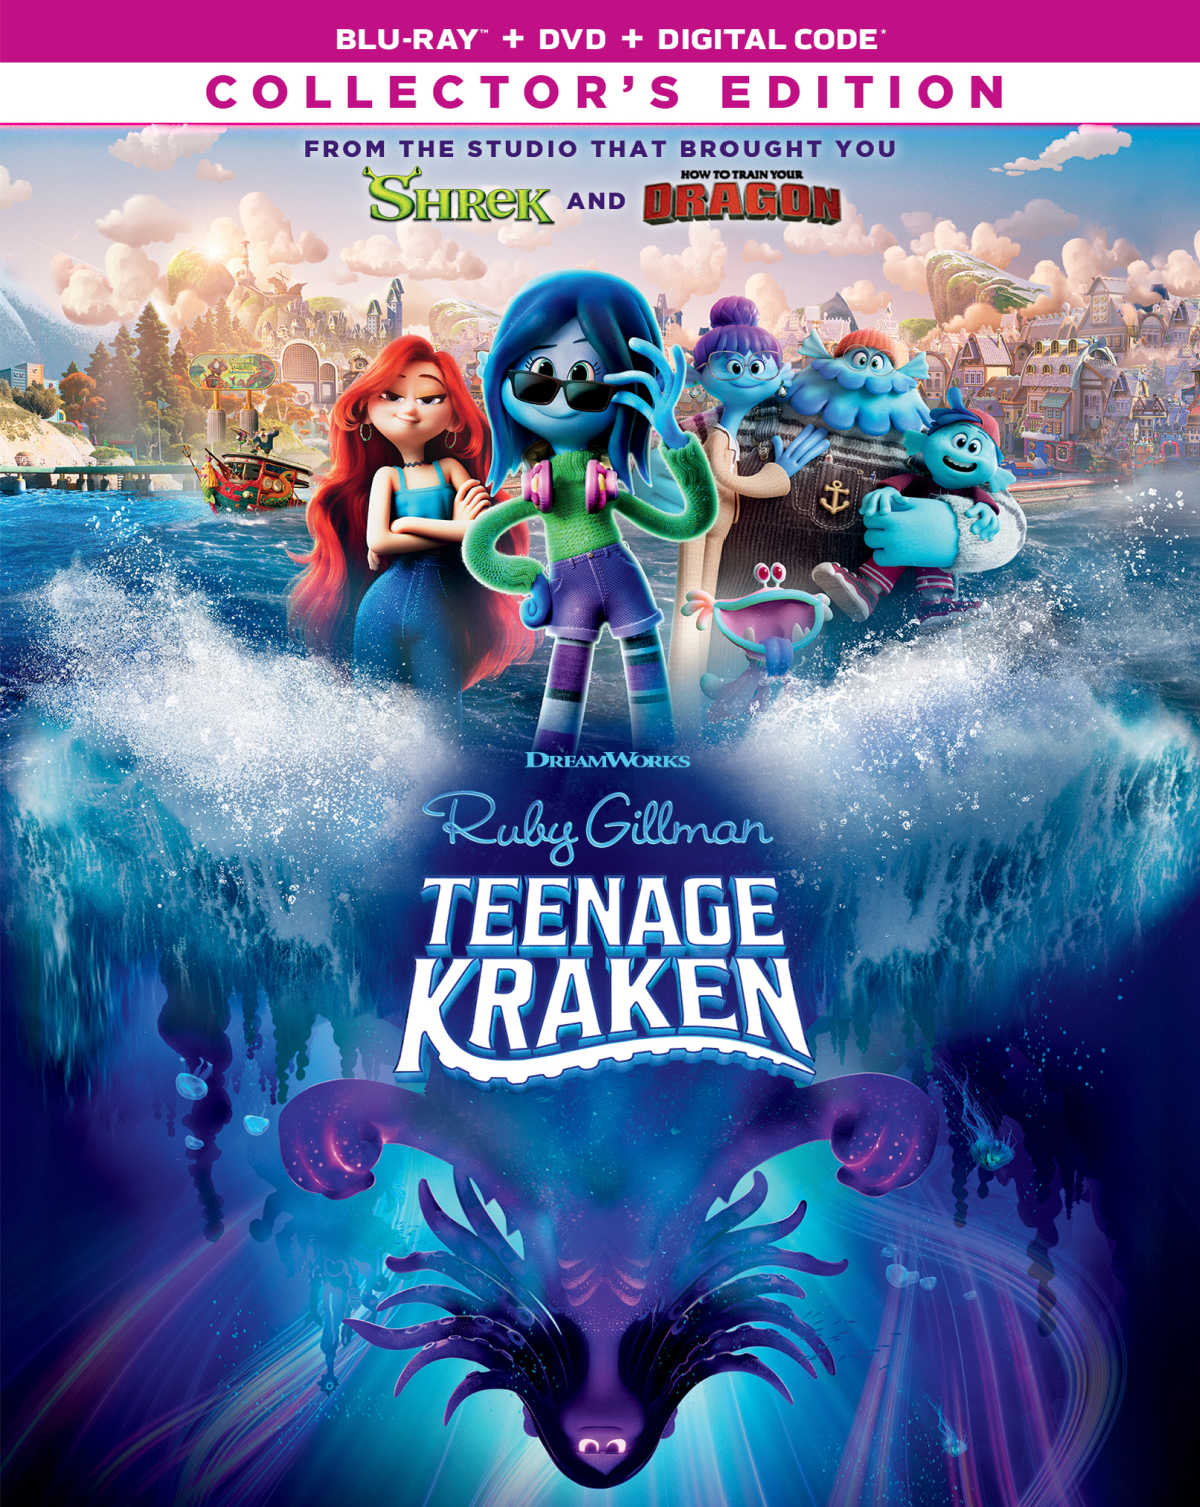 Ruby Gillman: Teenage Kraken, a new animated coming-of-age film, follows a teenage sea monster who just wants to fit in. With this fun and unique twist on the classic coming-of-age story, this film is sure to entertain teens, tweens, and kids alike.